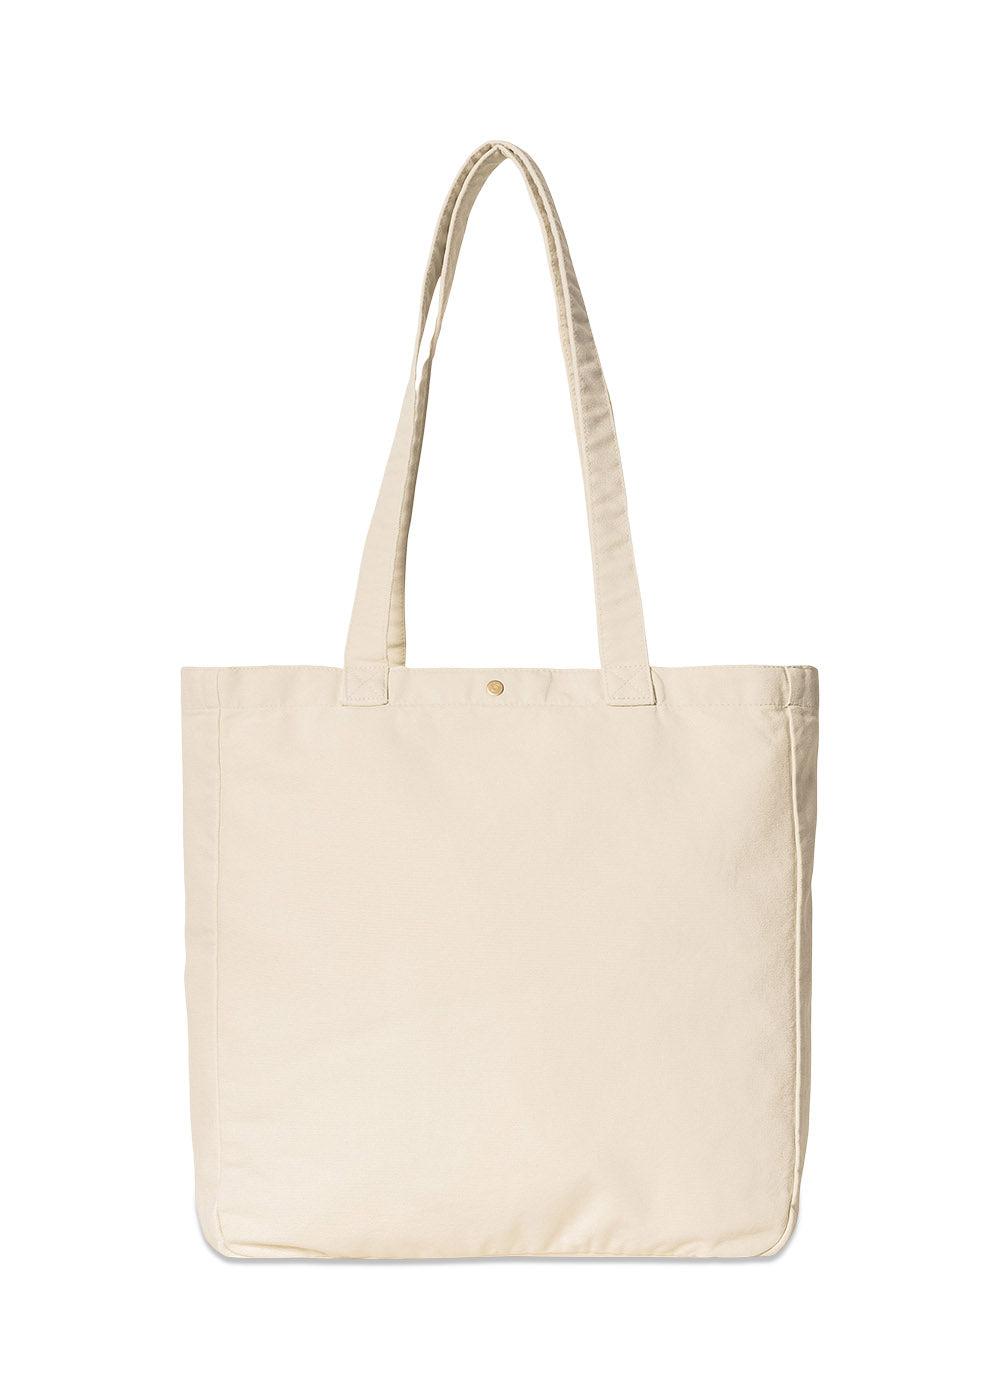 Carhartt WIP's Bayfield Tote - Salt Stone Washed. Køb bags her.